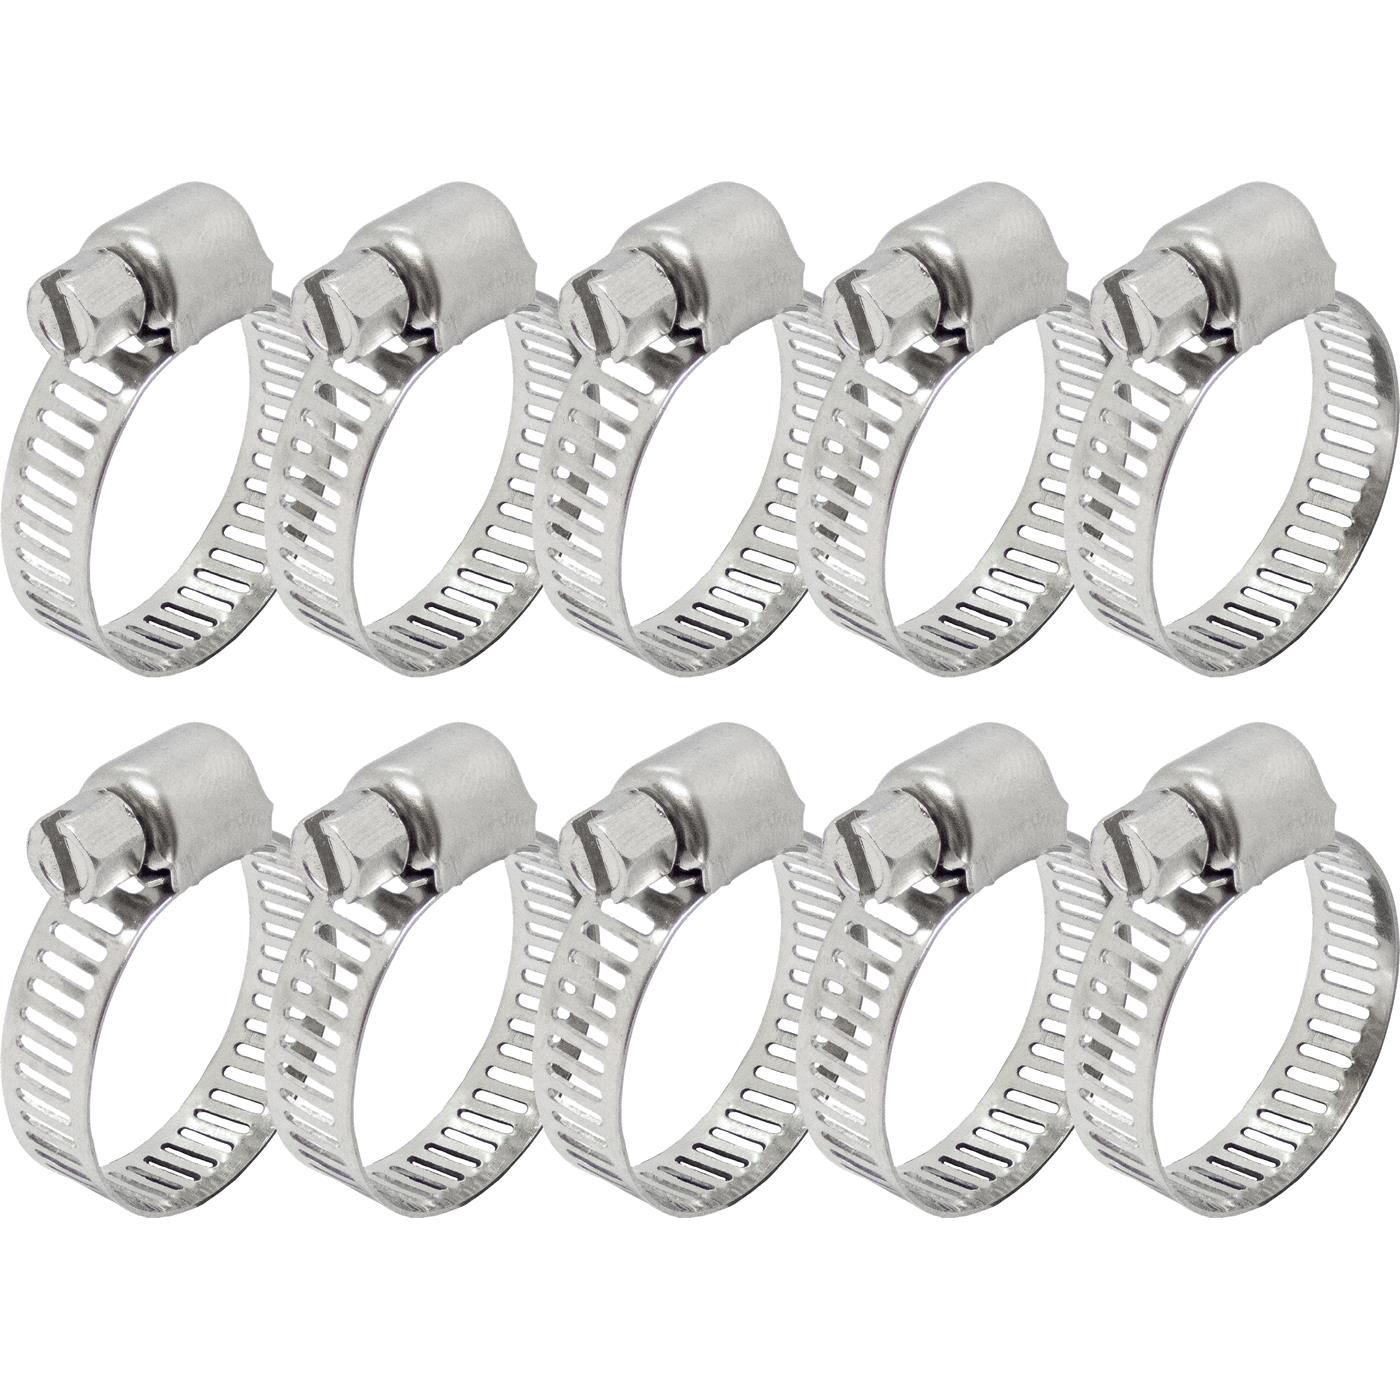 10x Hose clamp Stainless steel V2A 201 16-25mm Pipe clamp Hose clamp